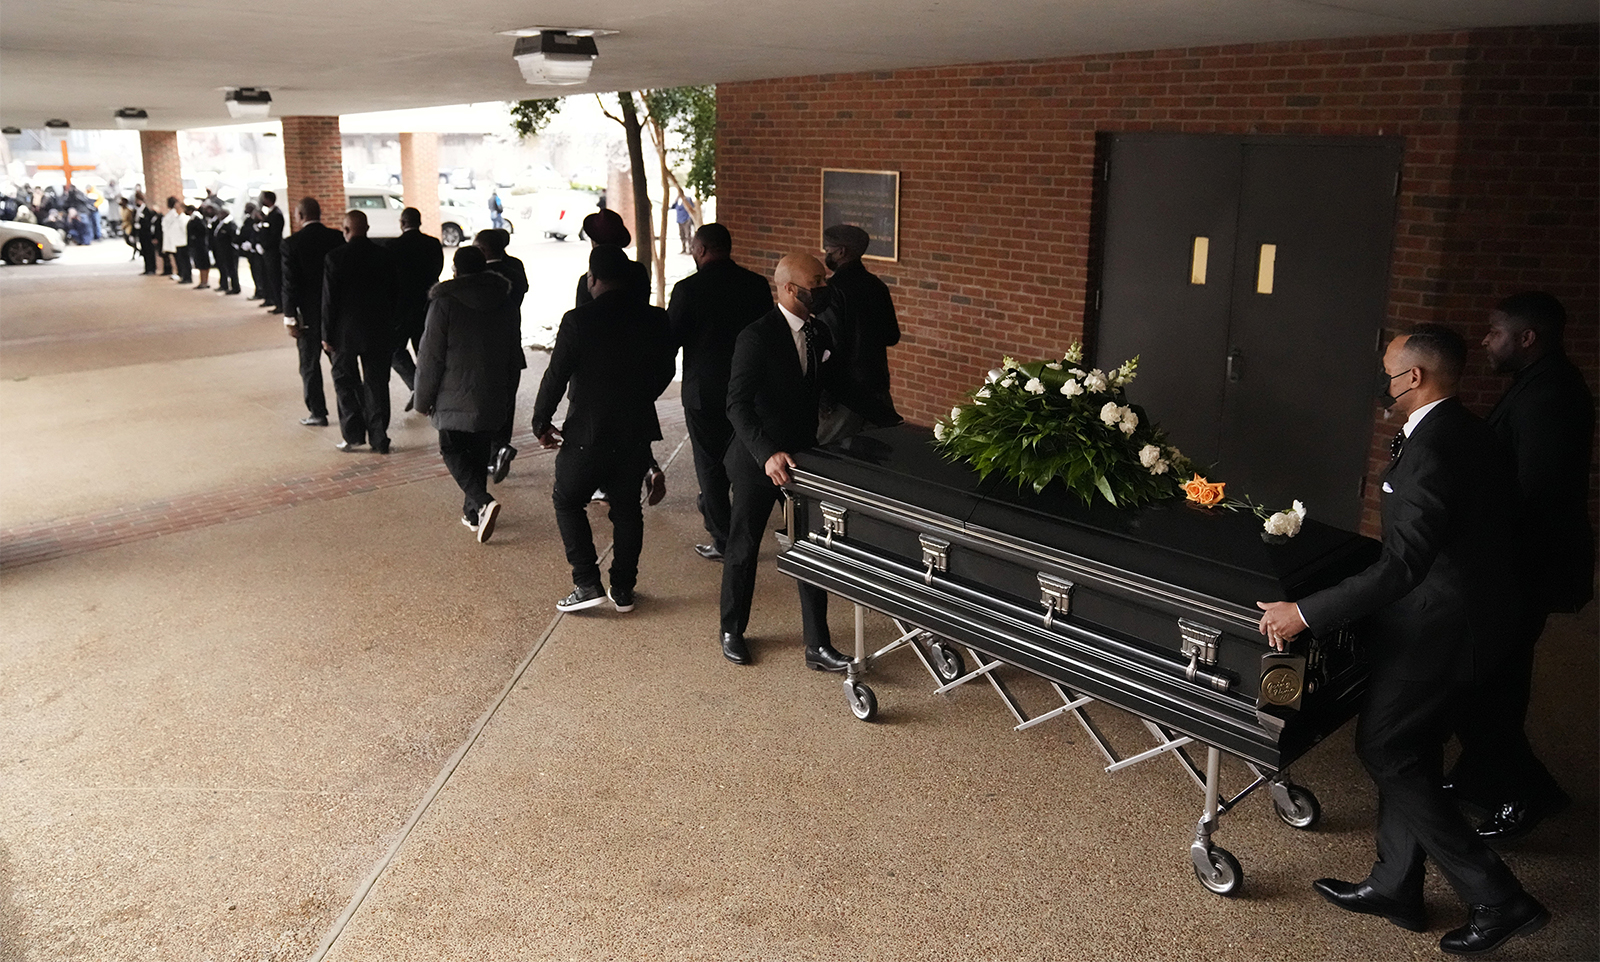 The remains of Tyre Nichols are escorted out of the Mississippi Boulevard Christian Church after the funeral service on Wednesday, Feb. 1, 2023, in Memphis, Tenn. Nichols was beaten by Memphis police officers, and later died from his injuries. (AP Photo/Jeff Roberson)